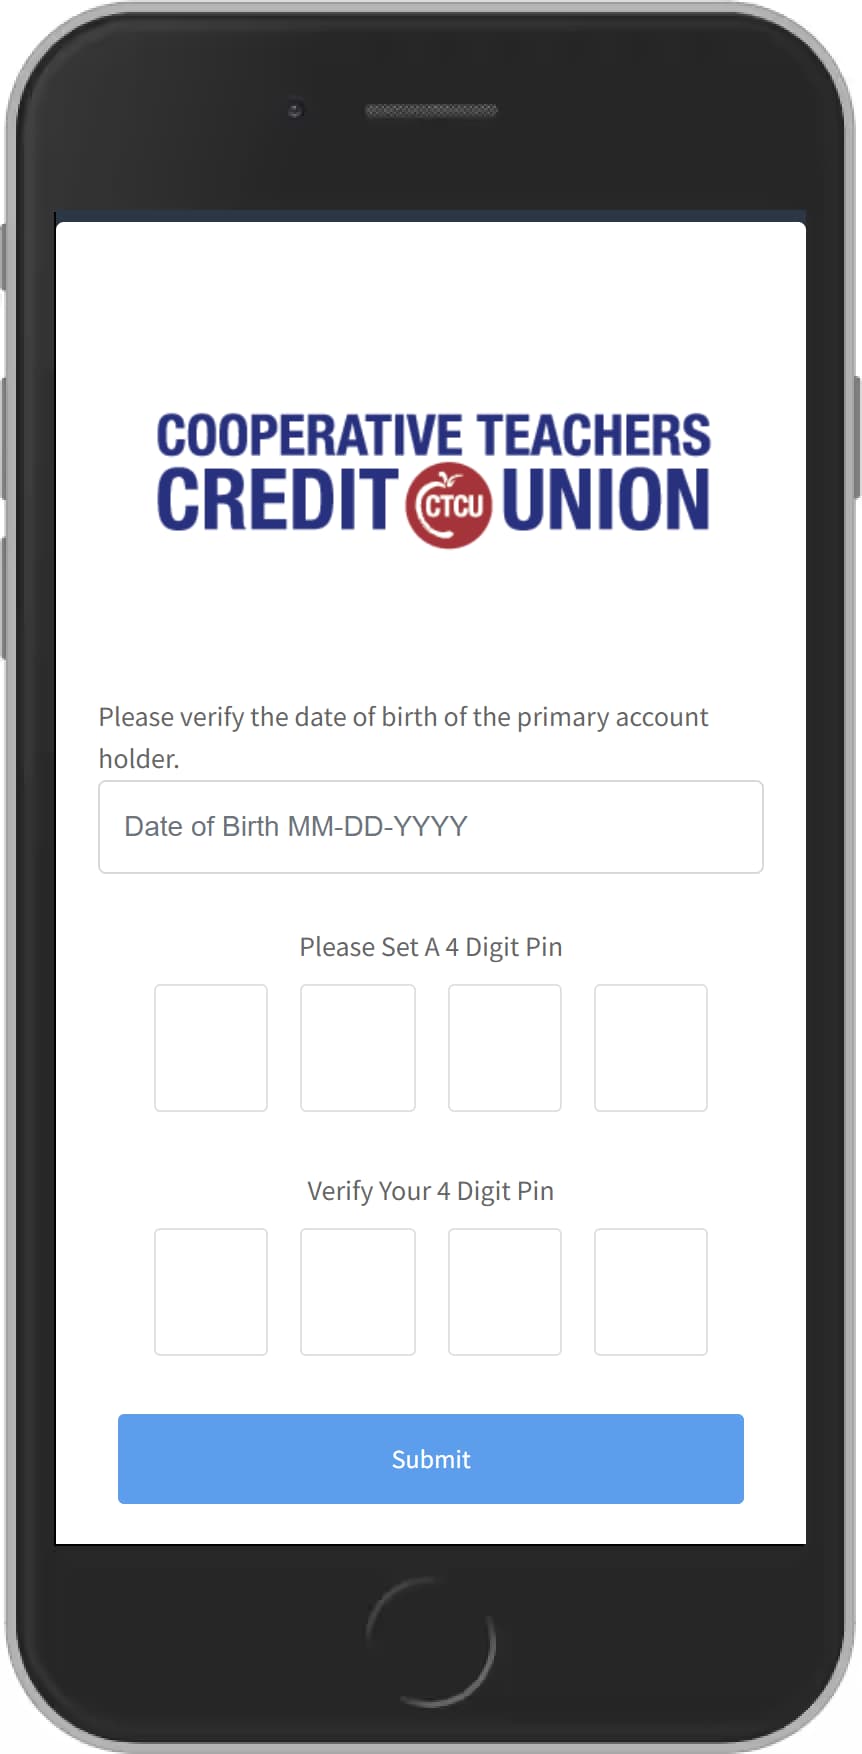 Making a Loan Payment is now easier than ever with CTCU, Create a pin